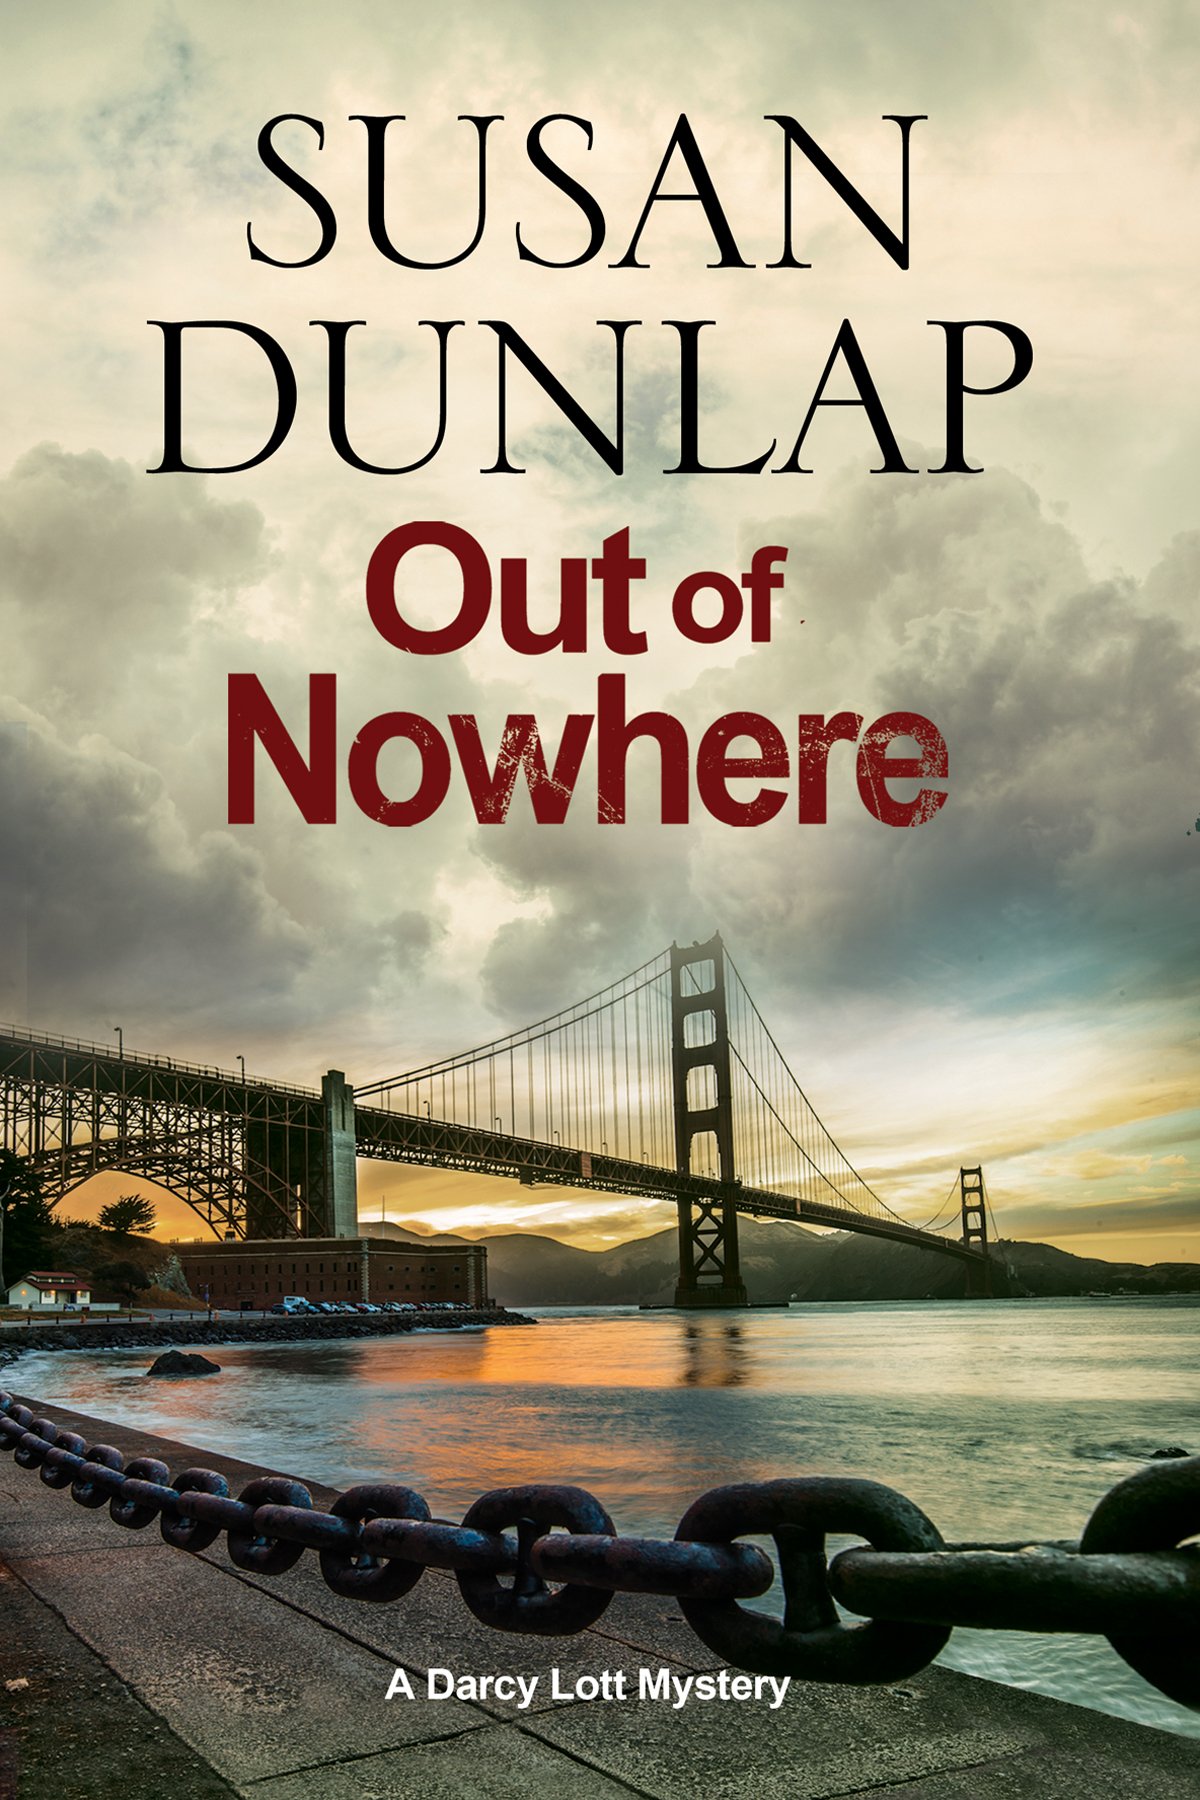 Out of Nowhere: A Zen Mystery Set in San Francisco